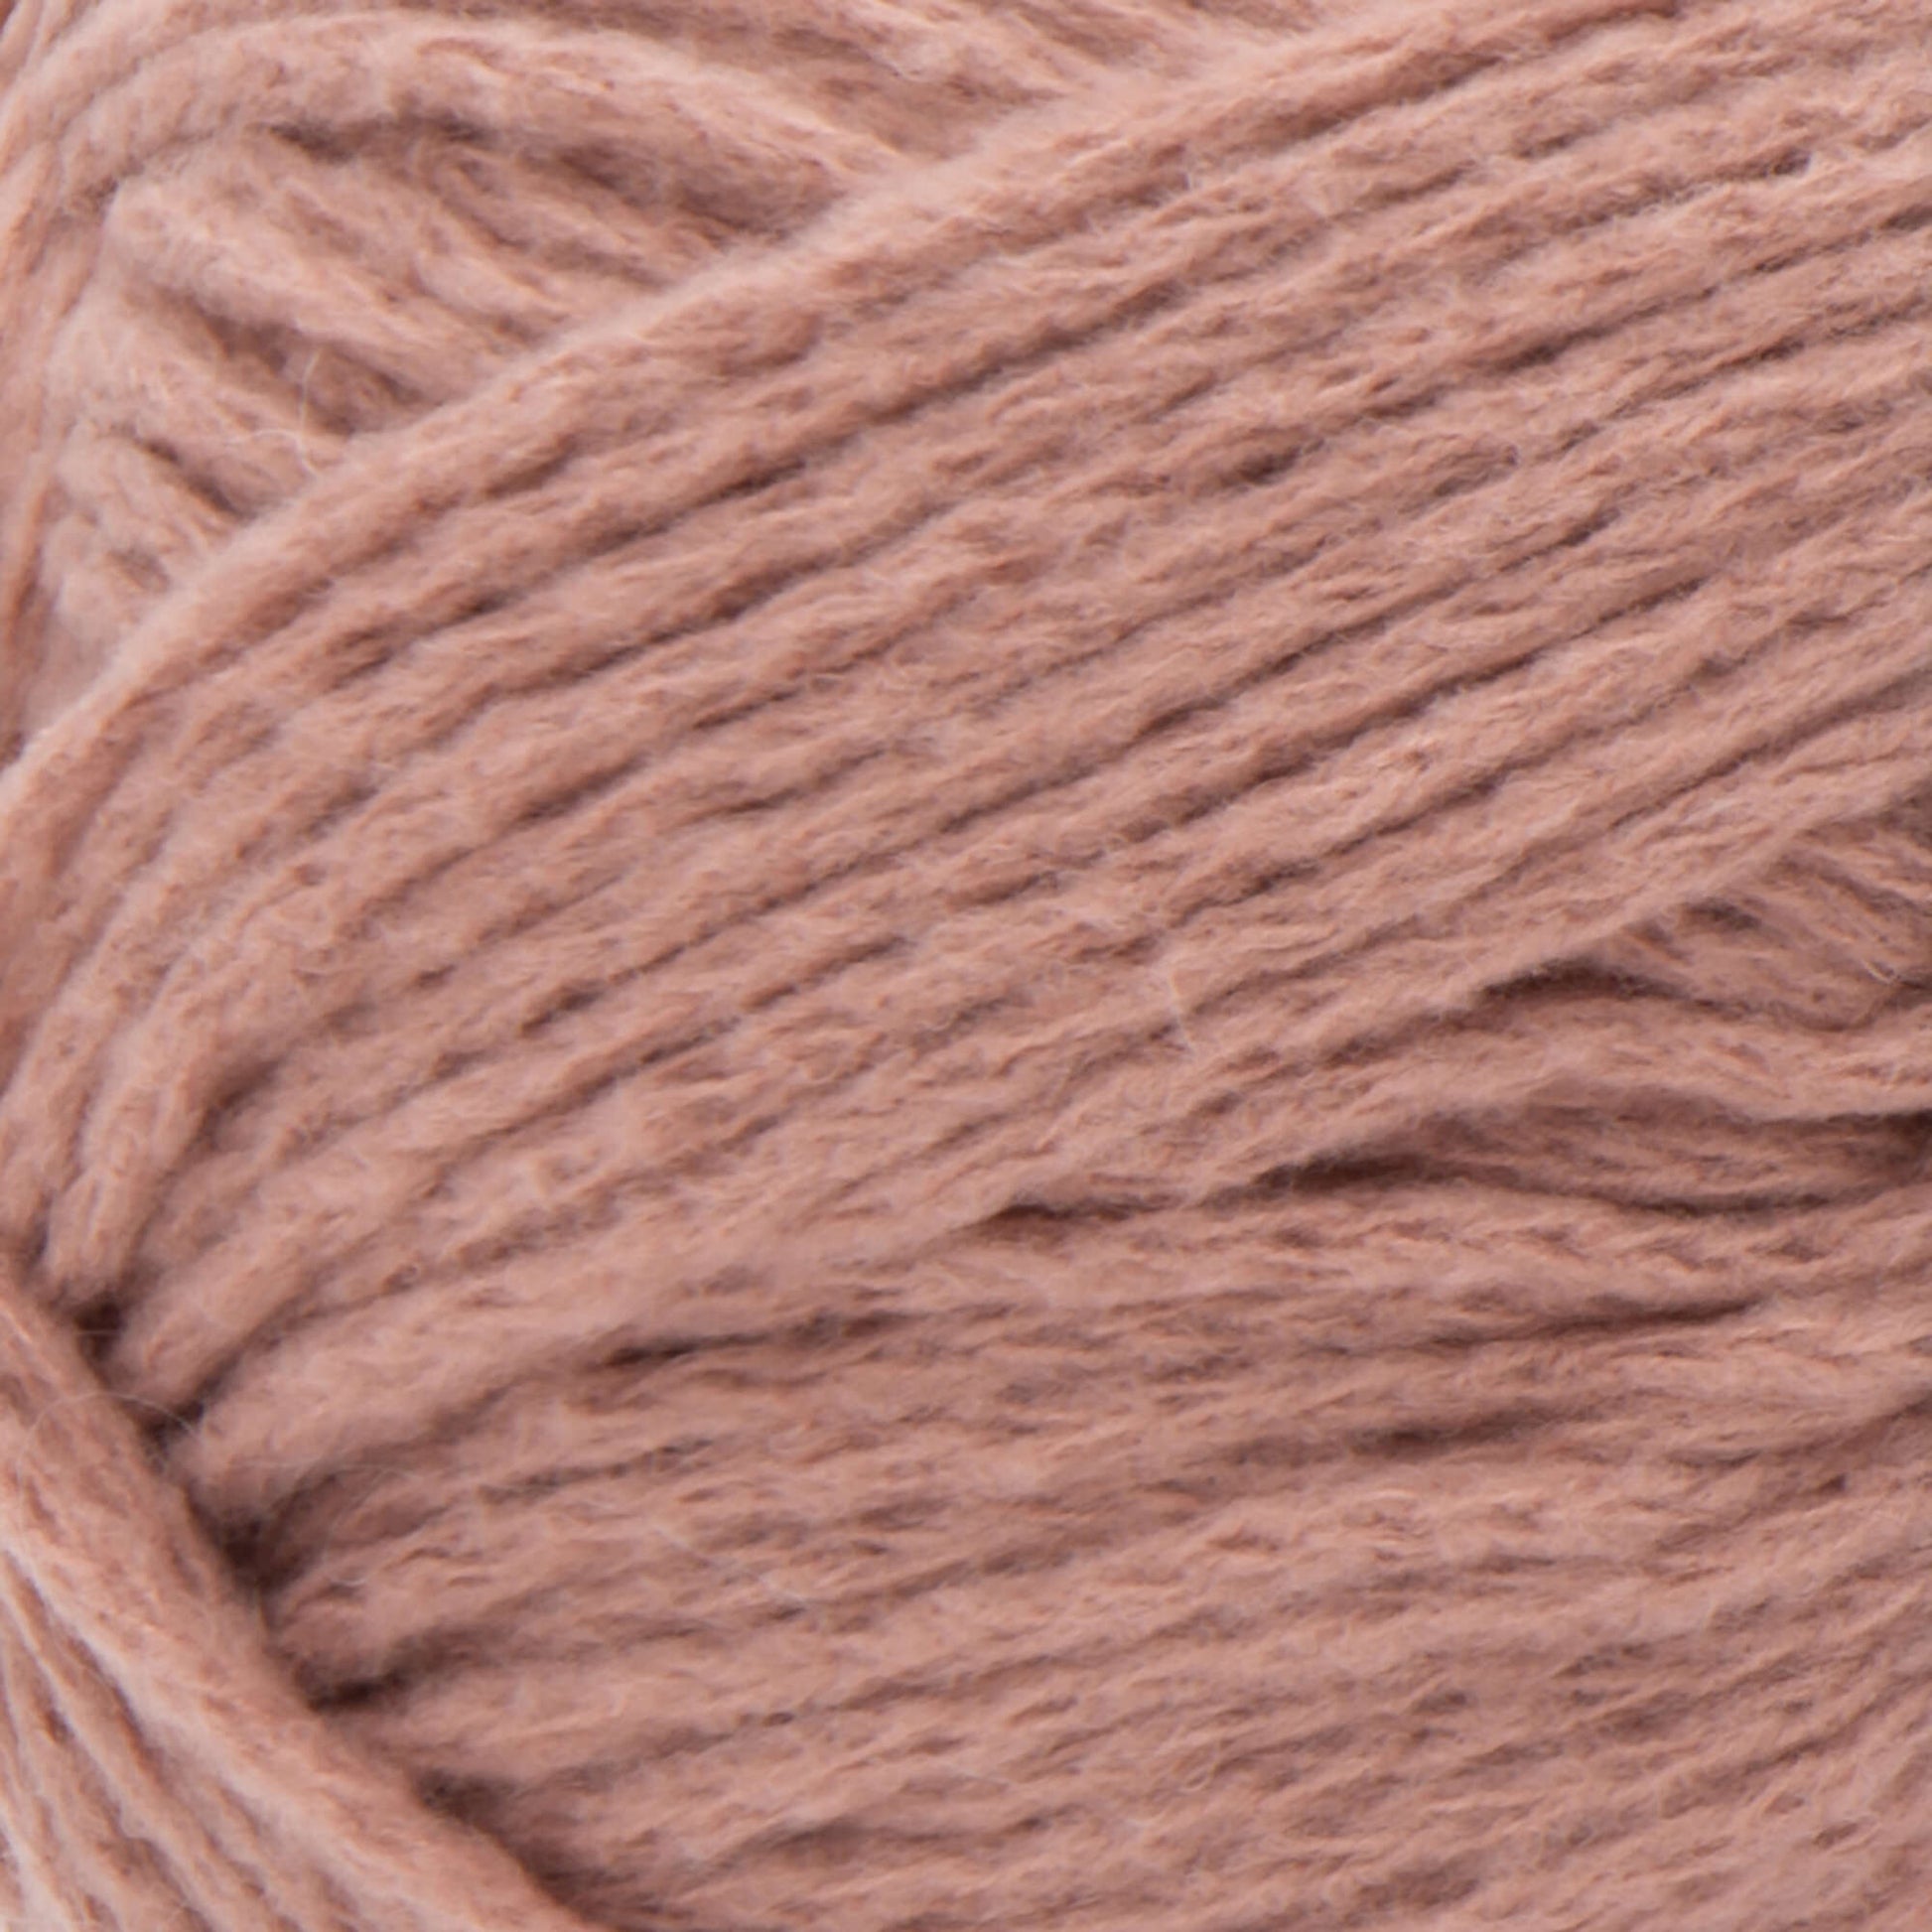 Red Heart Amore Yarn - Discontinued shades Chai